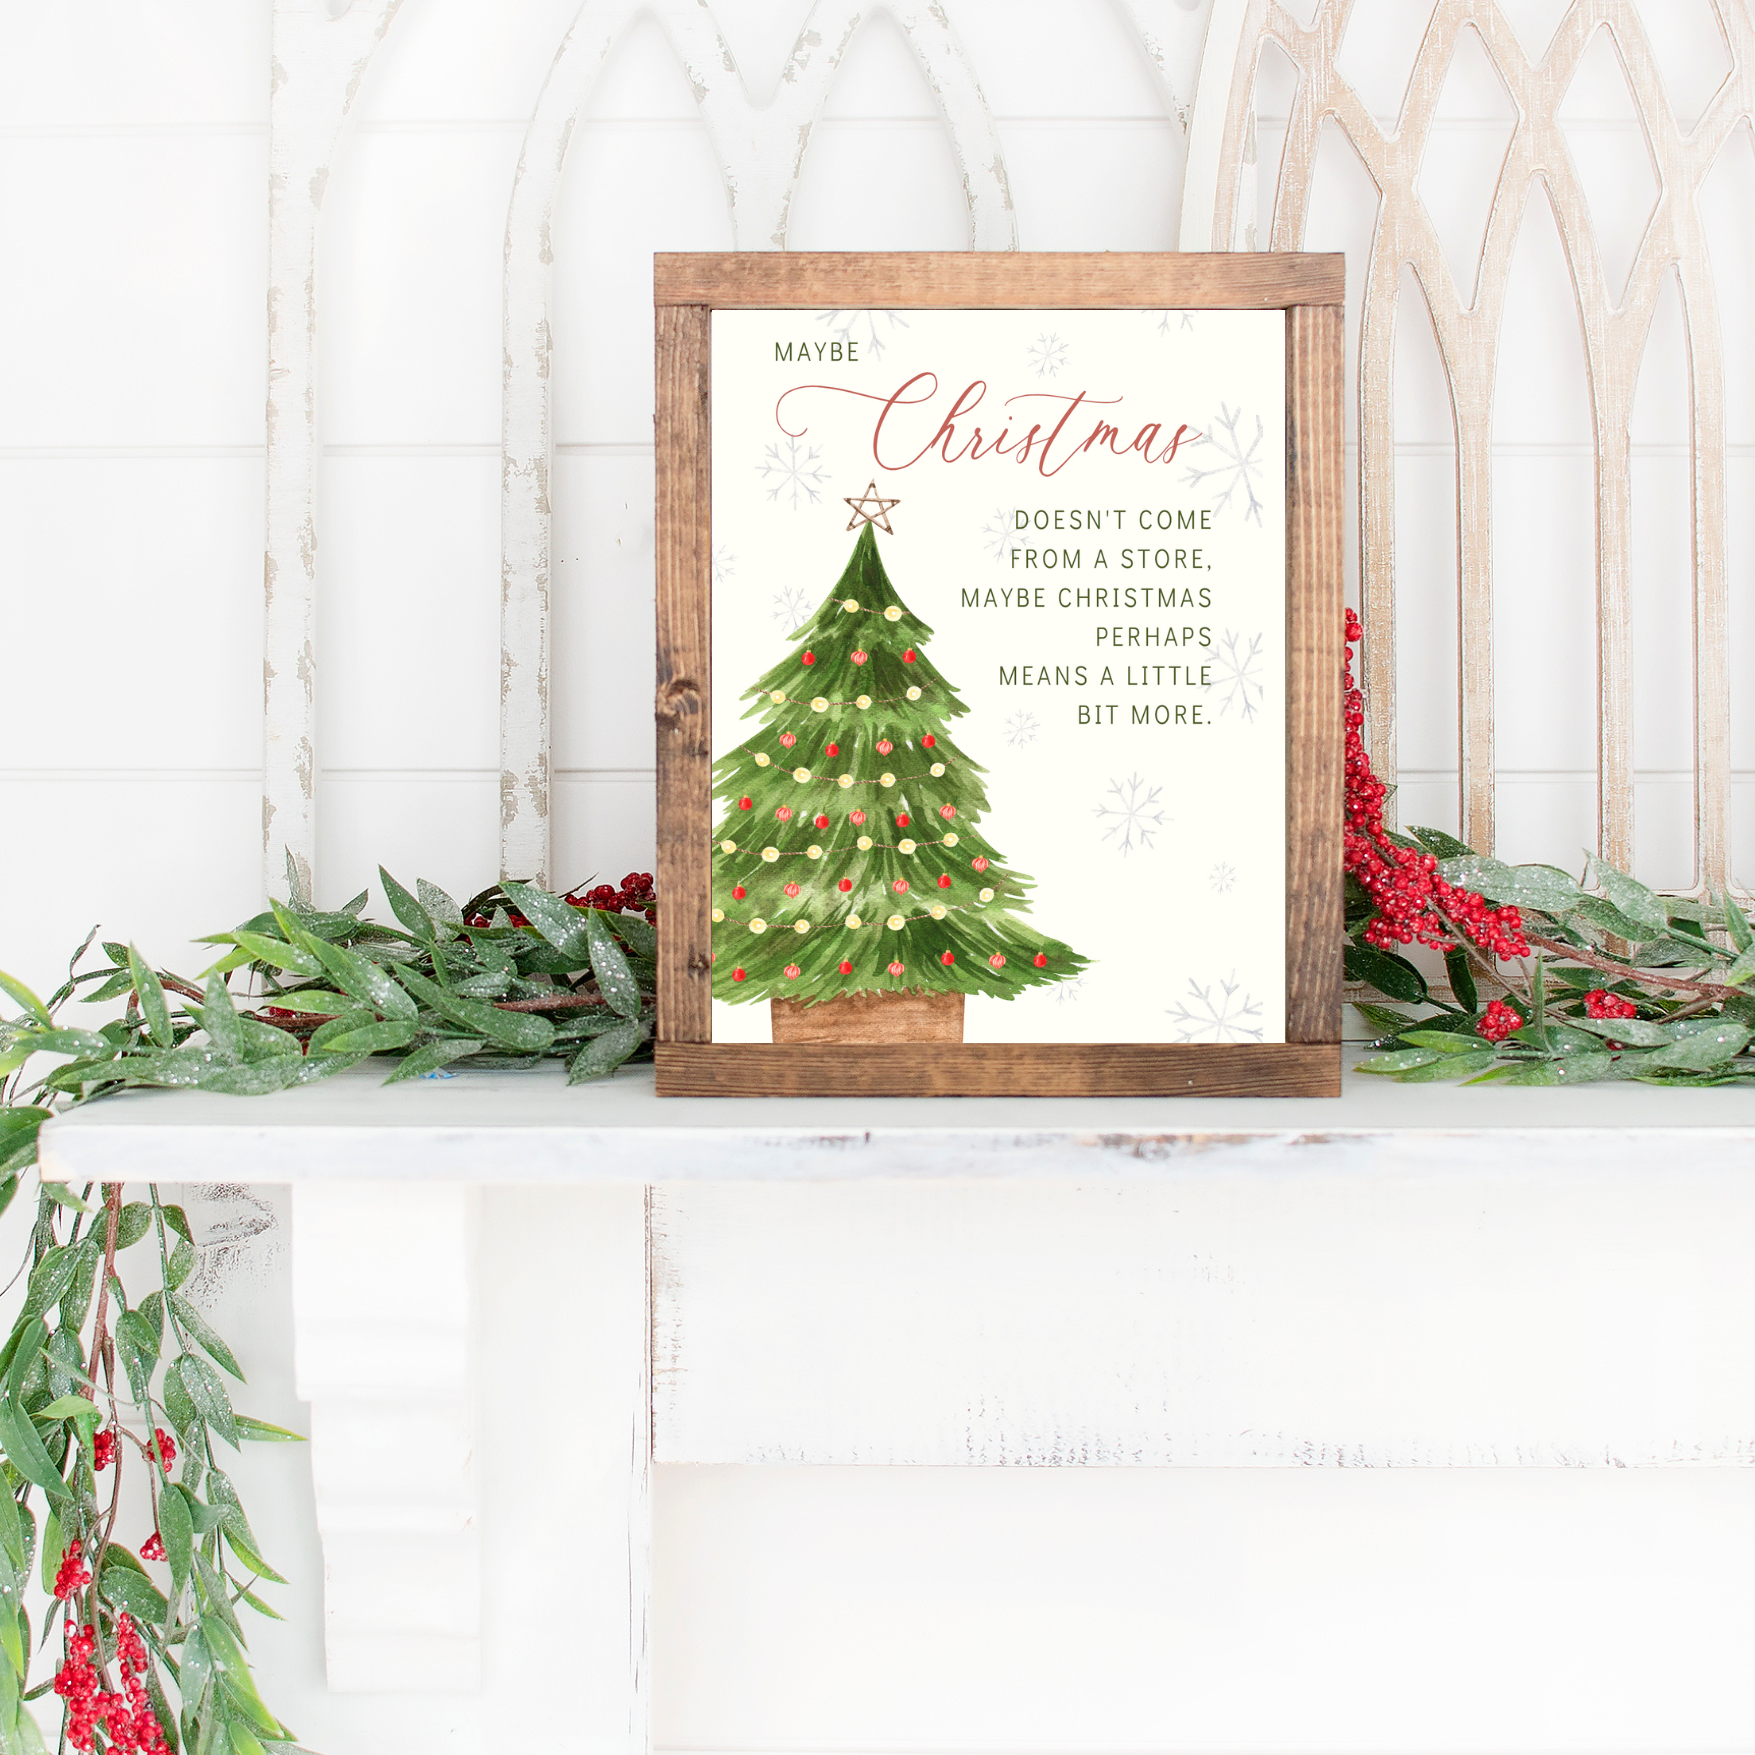 Maybe Christmas Doesn't Come From A Store, Maybe Christmas Perhaps Means a Little Bit More Canvas Printed Sign